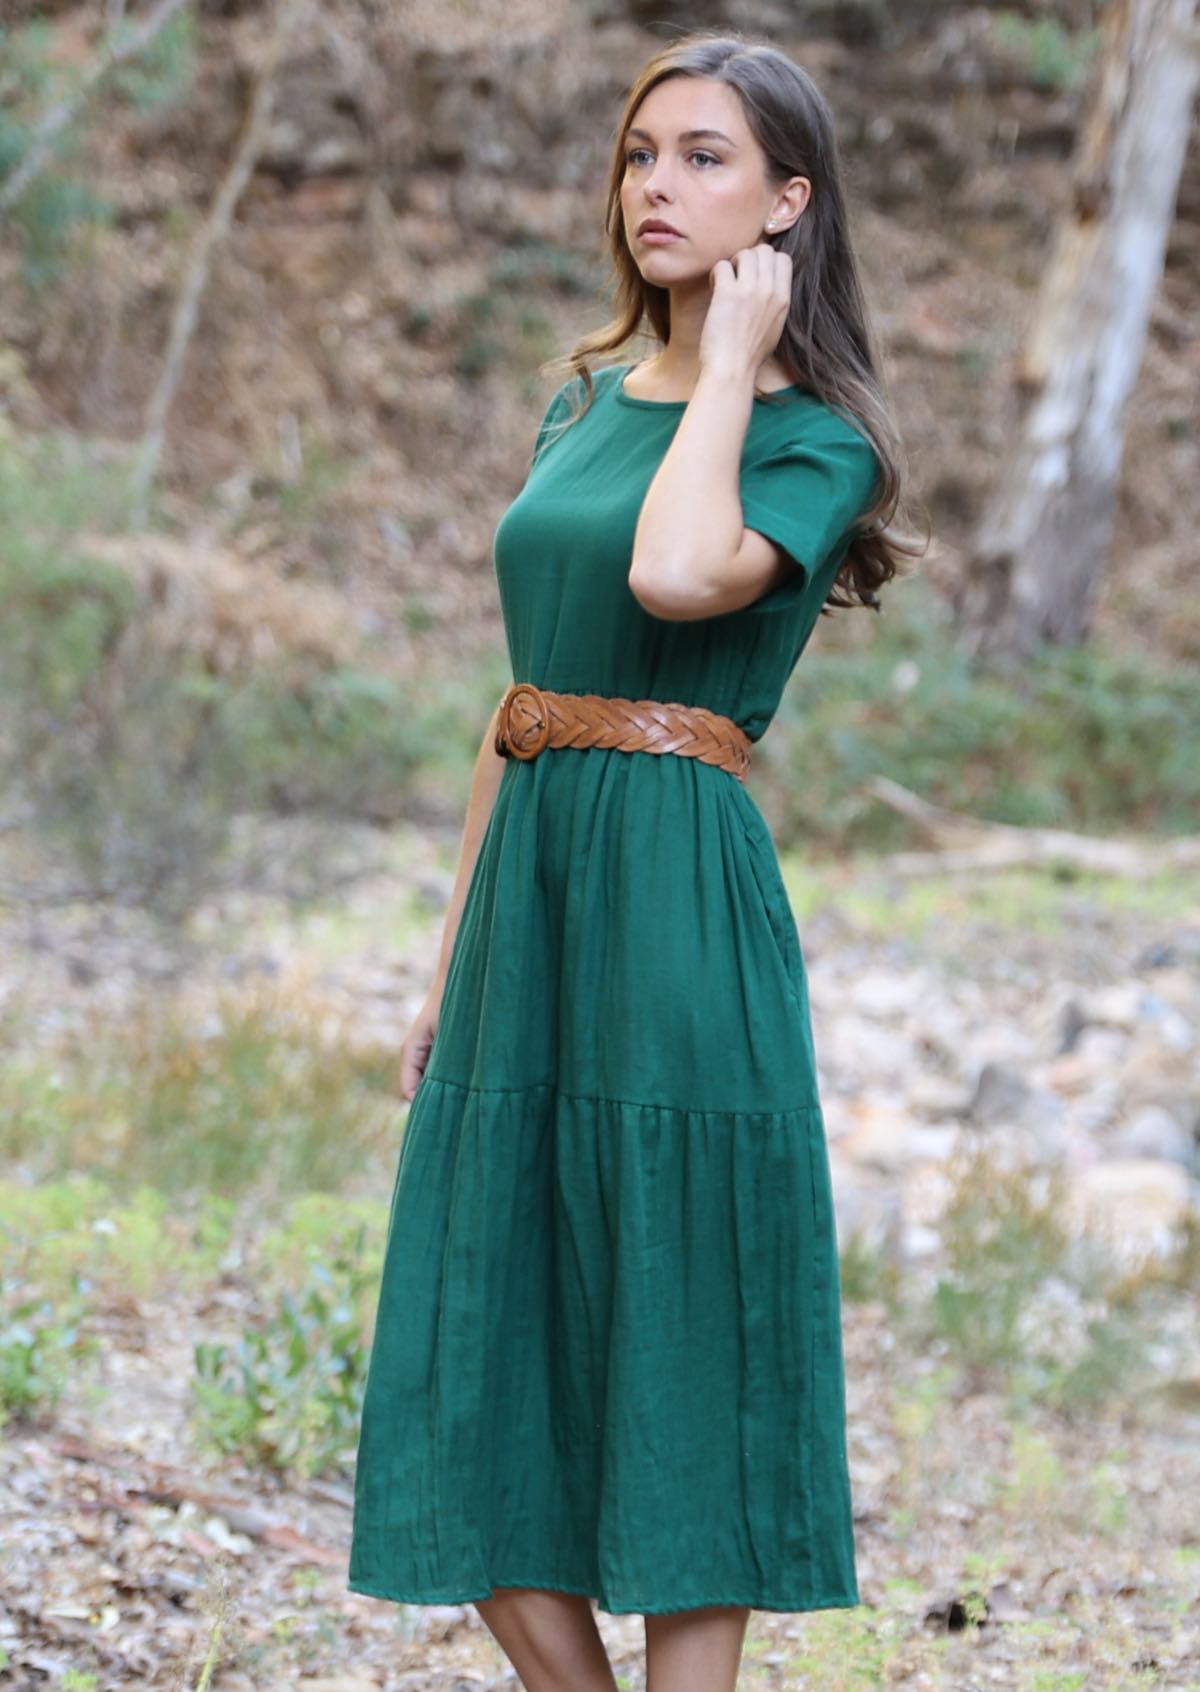 Green double cotton dress looks great with belt